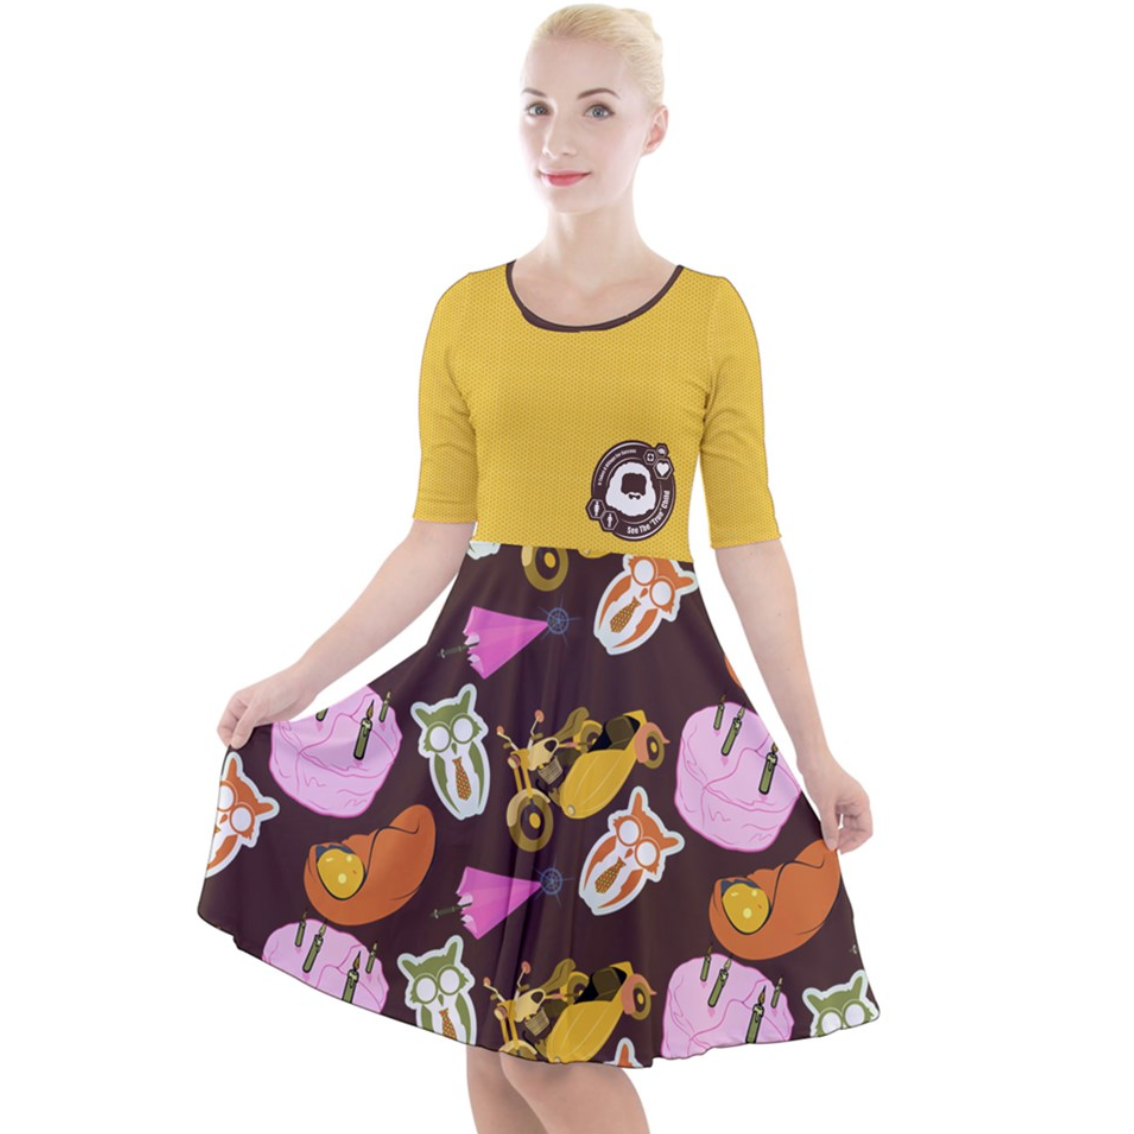 See The "TRUE" Child (Yellow) Quarter Sleeve A-Line Dress - Inspired by literary character, Hagrid